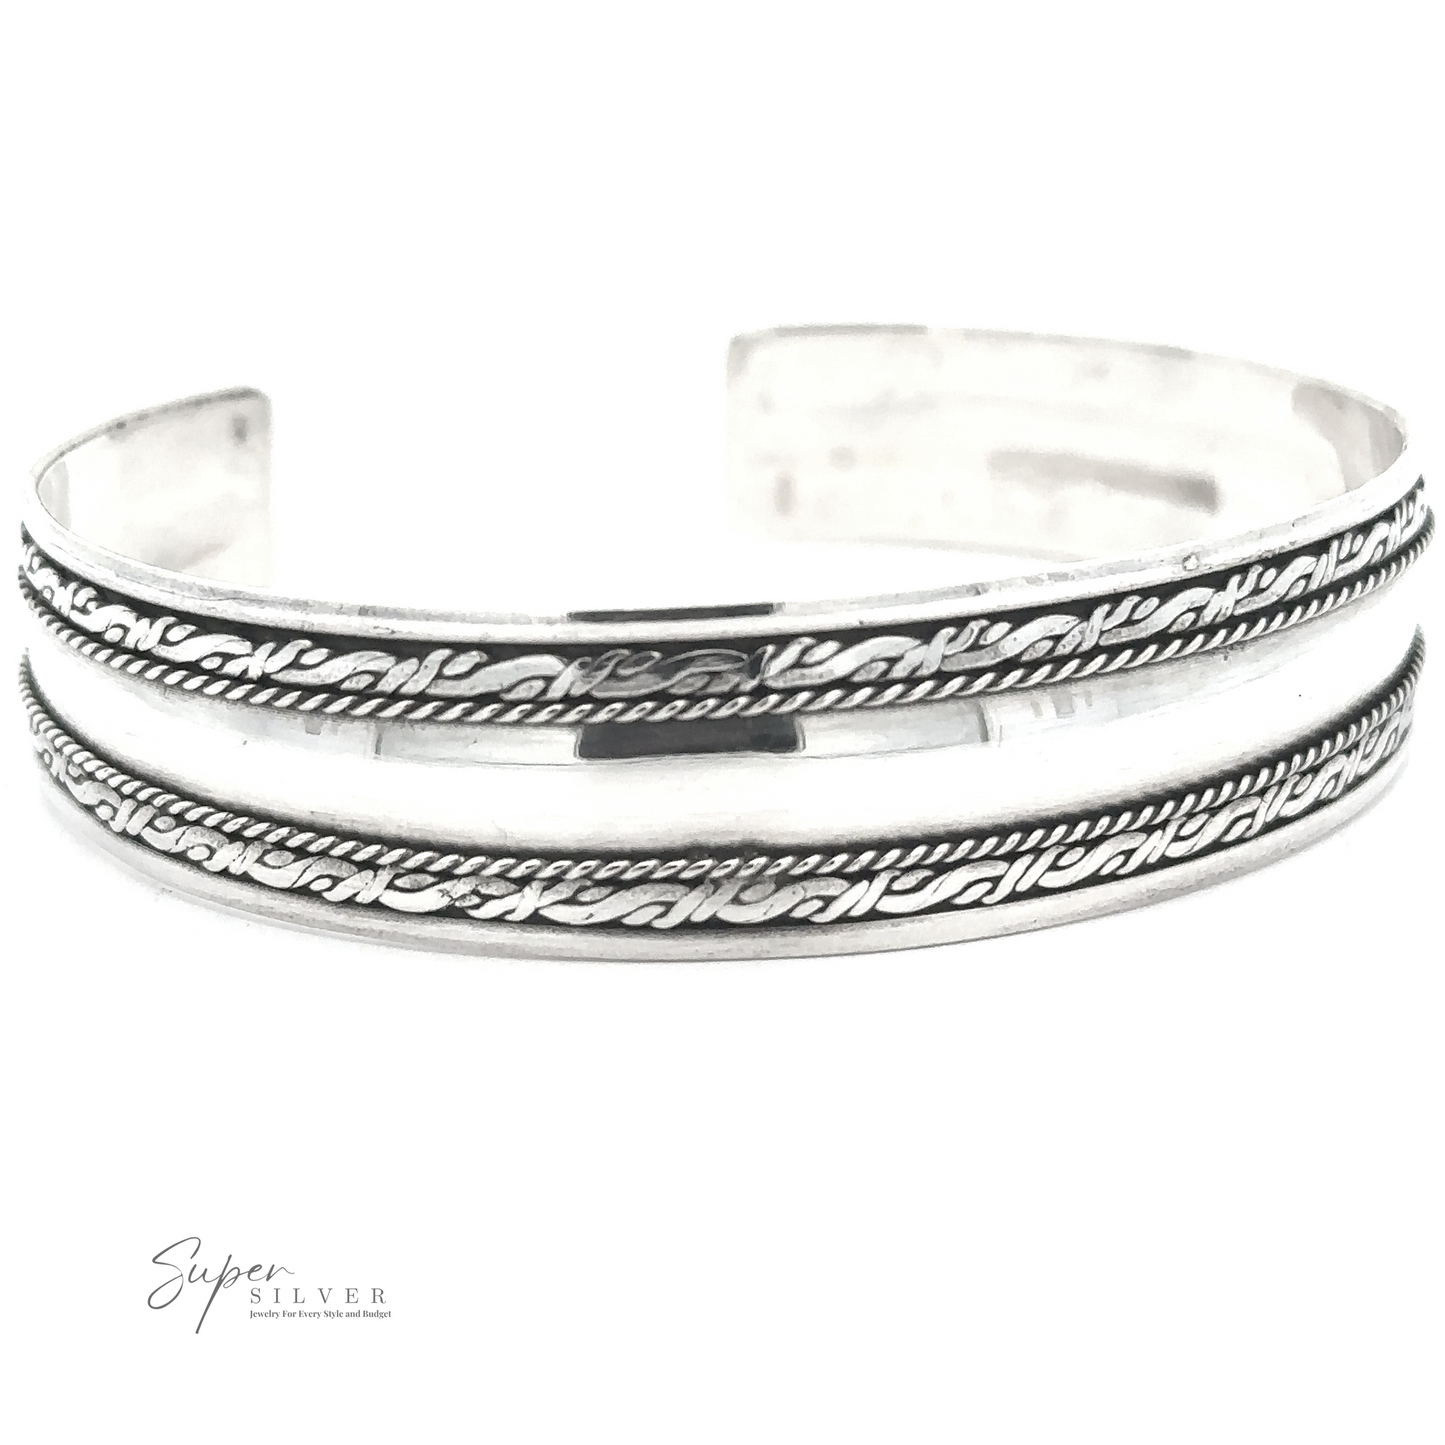 A handmade Silver Domed Cuff with Rope Pattern featuring two parallel engraved lines and a rope pattern in between. The brand "Super Silver" is visible in the bottom left corner, reminiscent of the exquisite craftsmanship found in Bali.